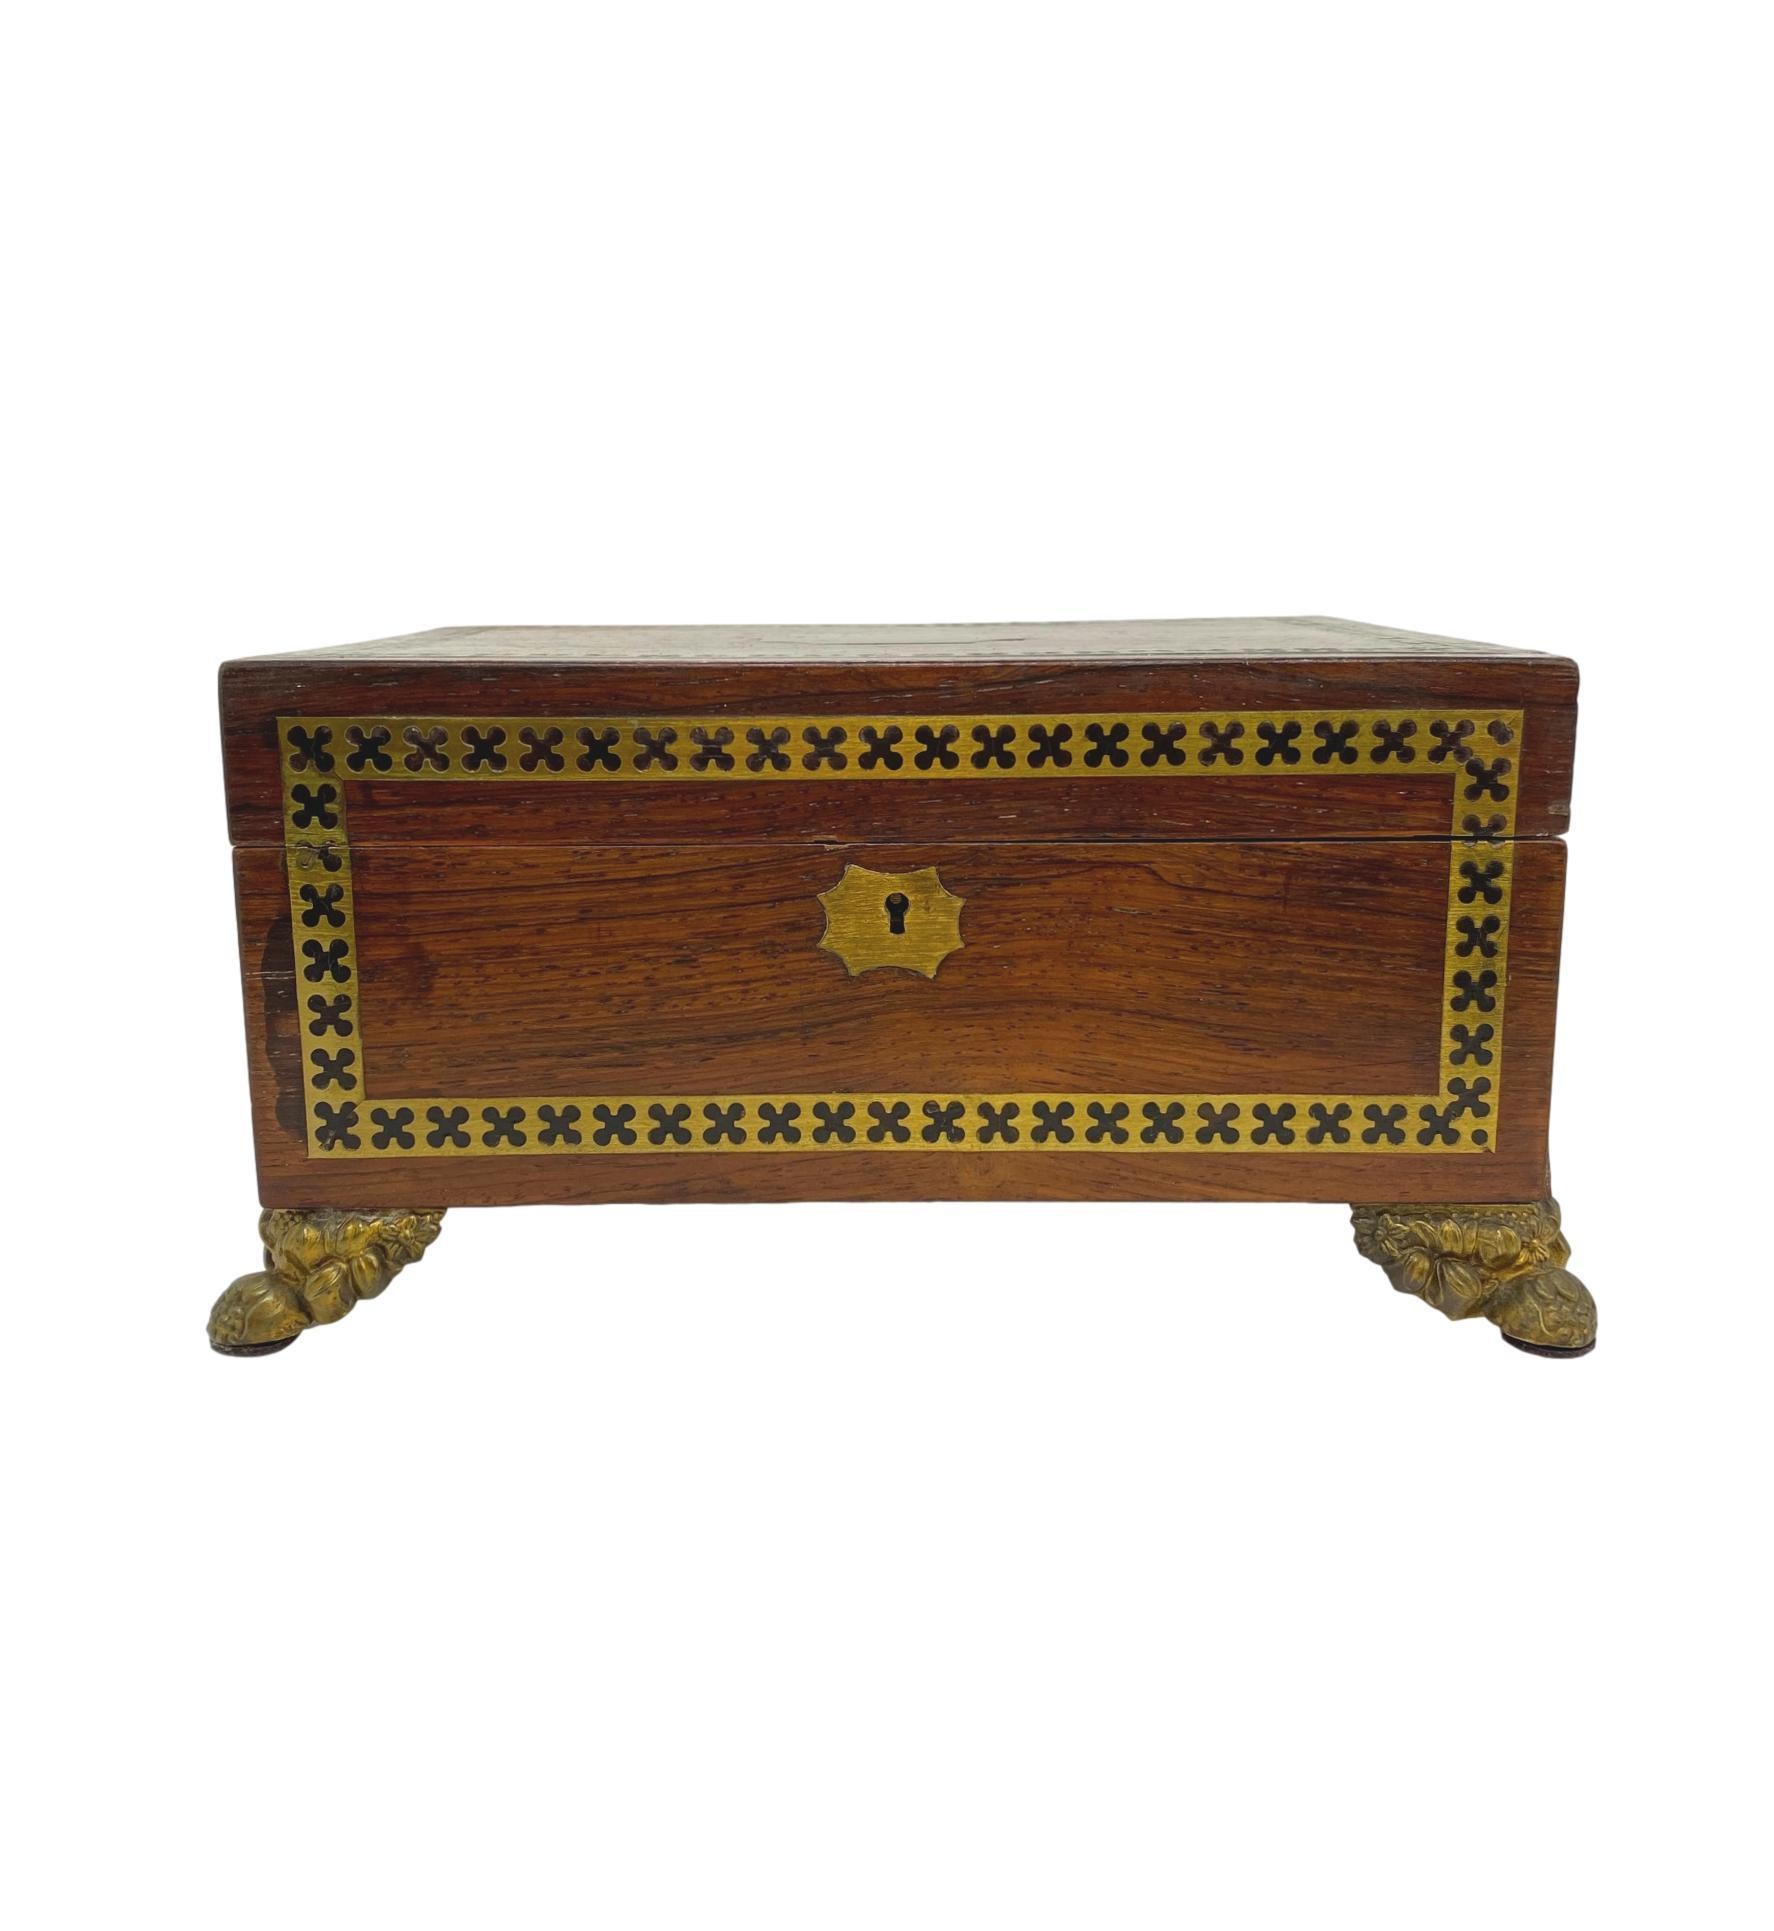 Antique Regency box in rosewood with inlaid ebony and brass decorative bands, with exceptional brass hardware, English, circa 1820.